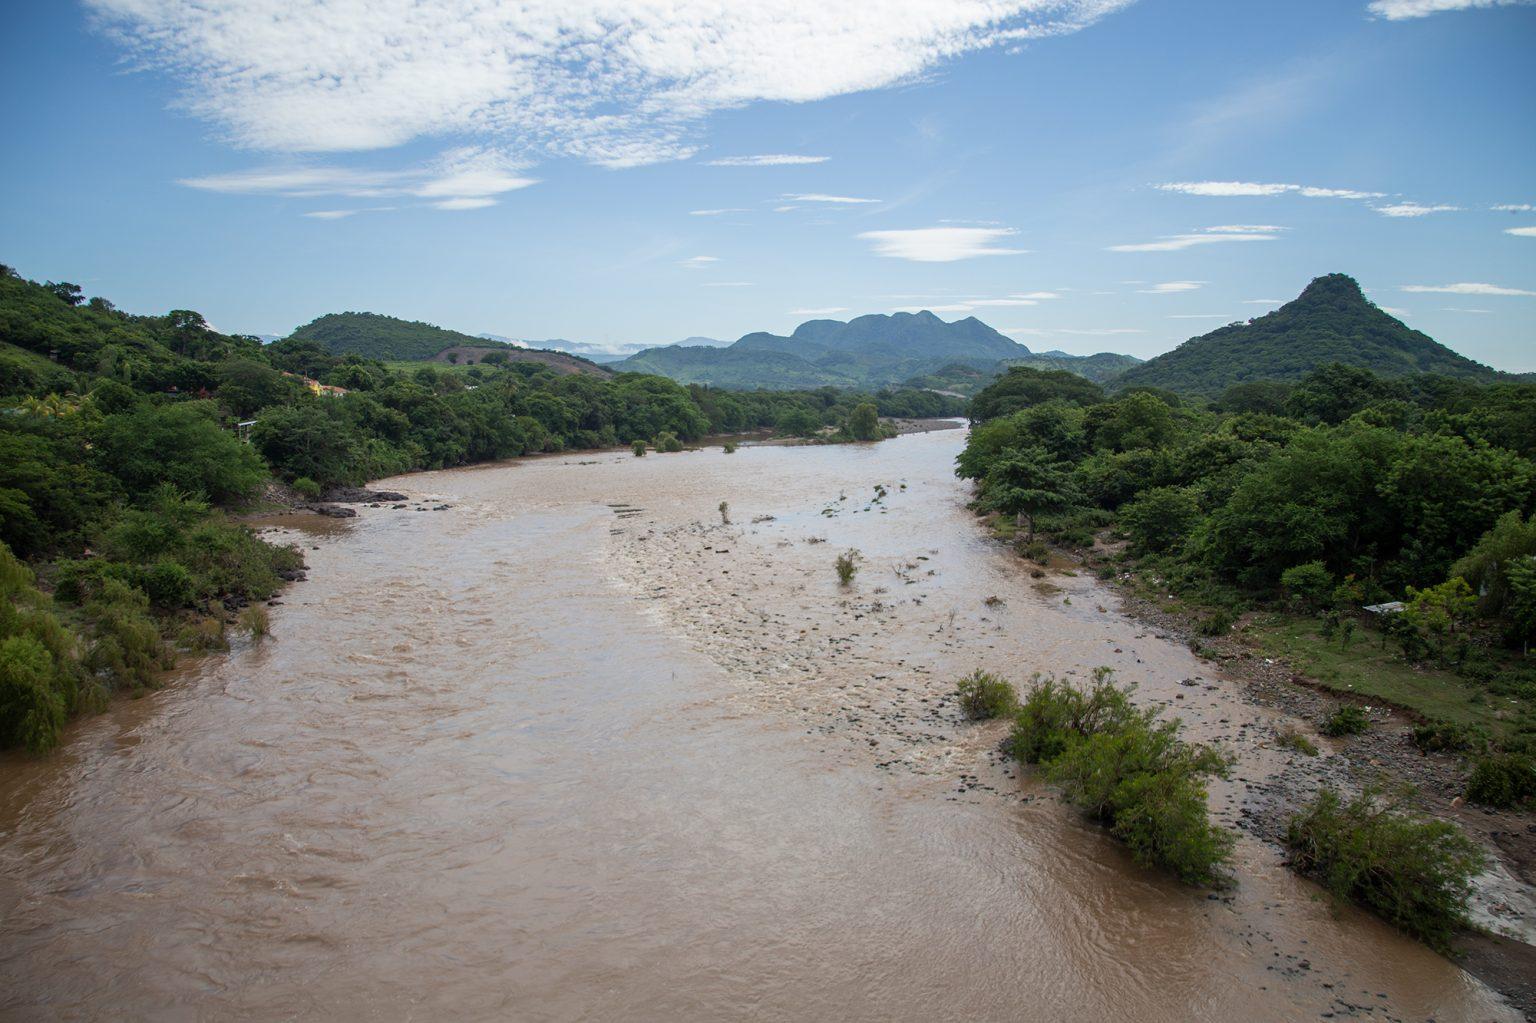 The Goascorán river serves as a natural border between Honduras and El Salvador. It begins in the La Paz department and flows into the Gulf of Fonseca. The food delivery project that the Honduran Red Cross coordinates – which also delivers water filters to many communities – has given food provisions worth at least $46 USD to 2,700 families affected by Covid-19, across 17 communities in the basin. Goascorán, Valle, August 29 2020. Photo: Martín Cálix